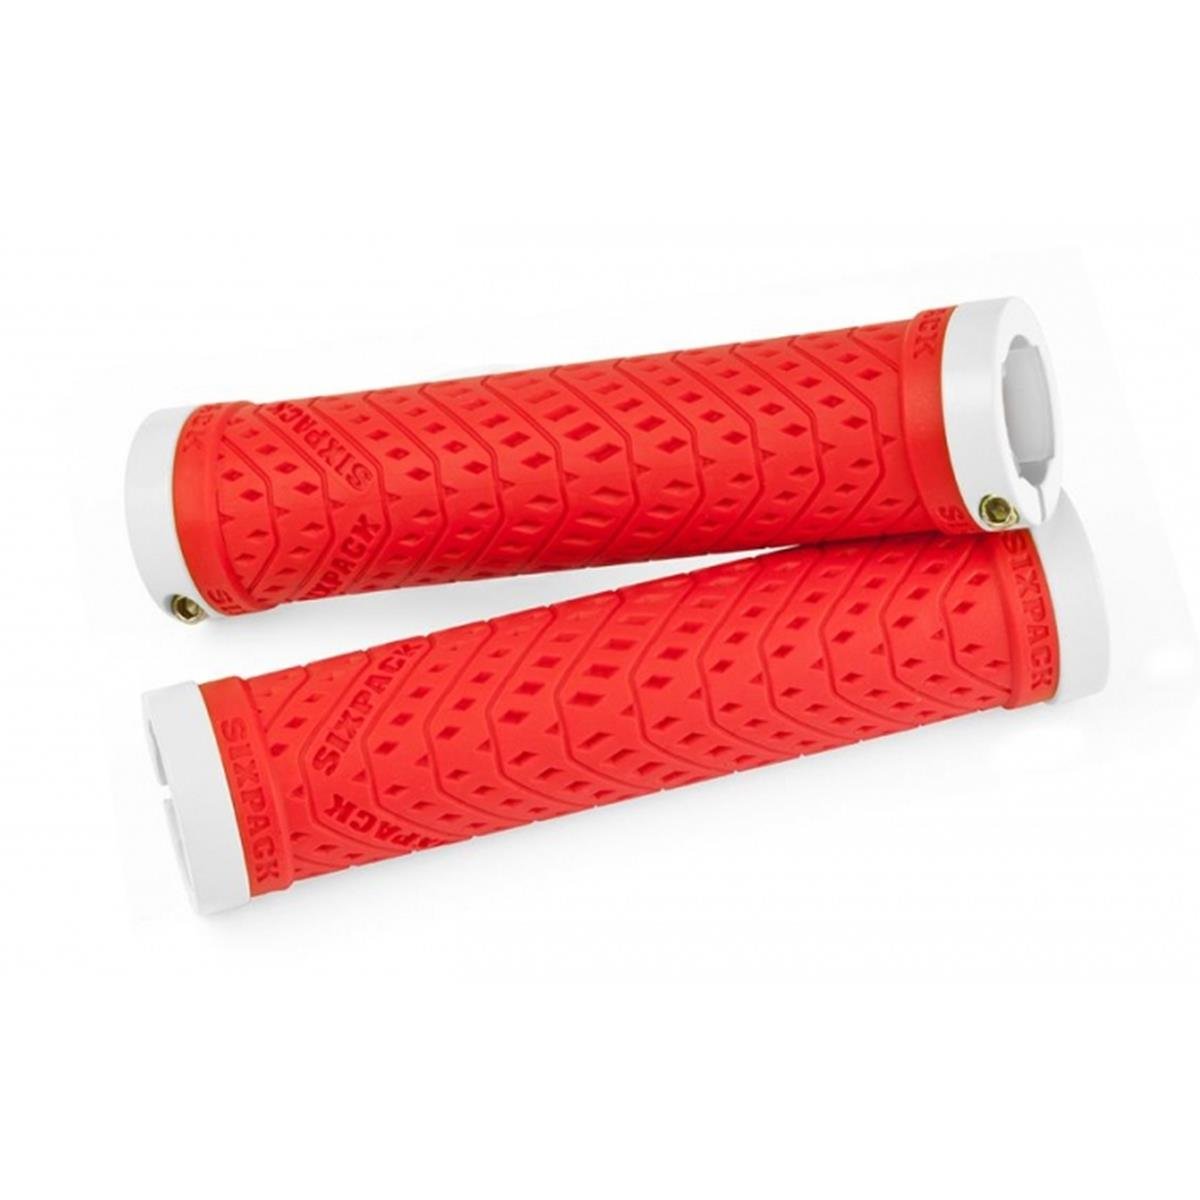 Sixpack MTB Grips K-Trix Red/White, Lock On System, 140 mm Length